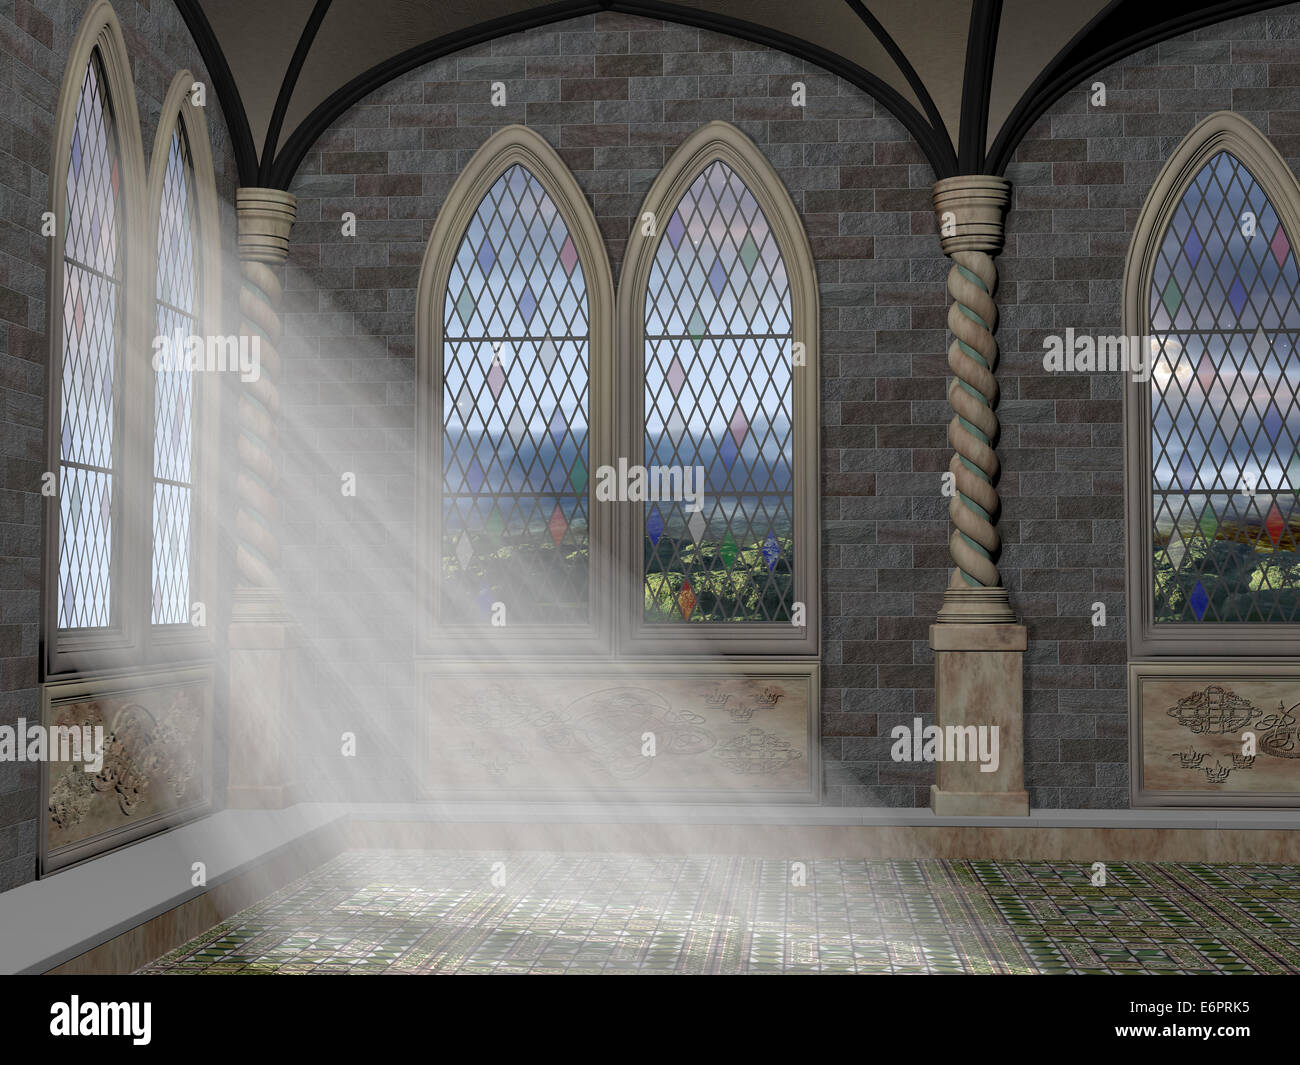 God rays streaming through a stained glass leaded window Stock Photo